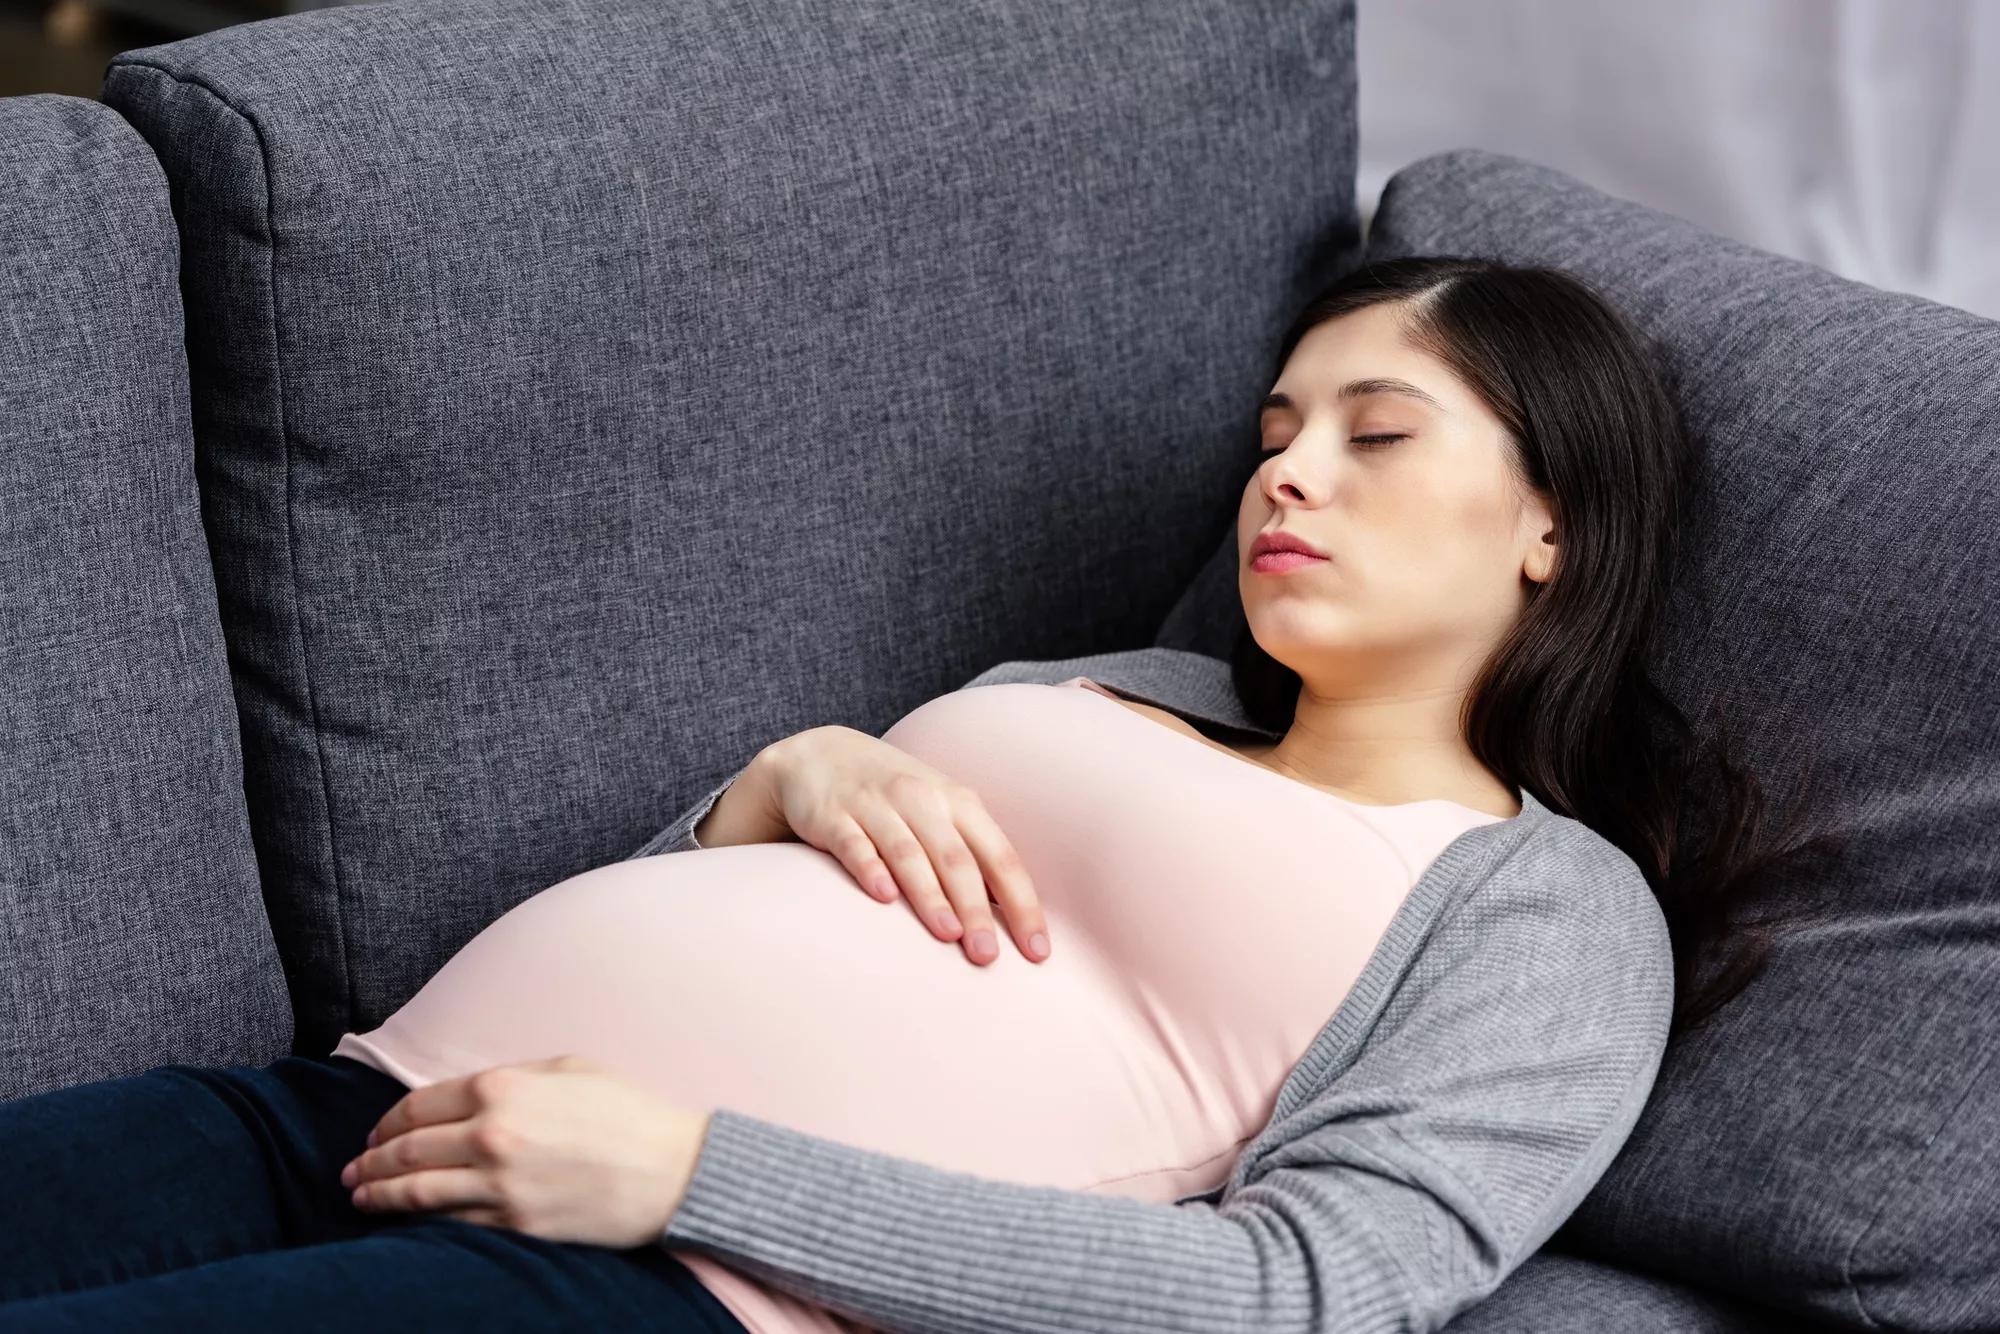 Exactly How Bad Is It to Sleep on Your Back When You're Pregnant?